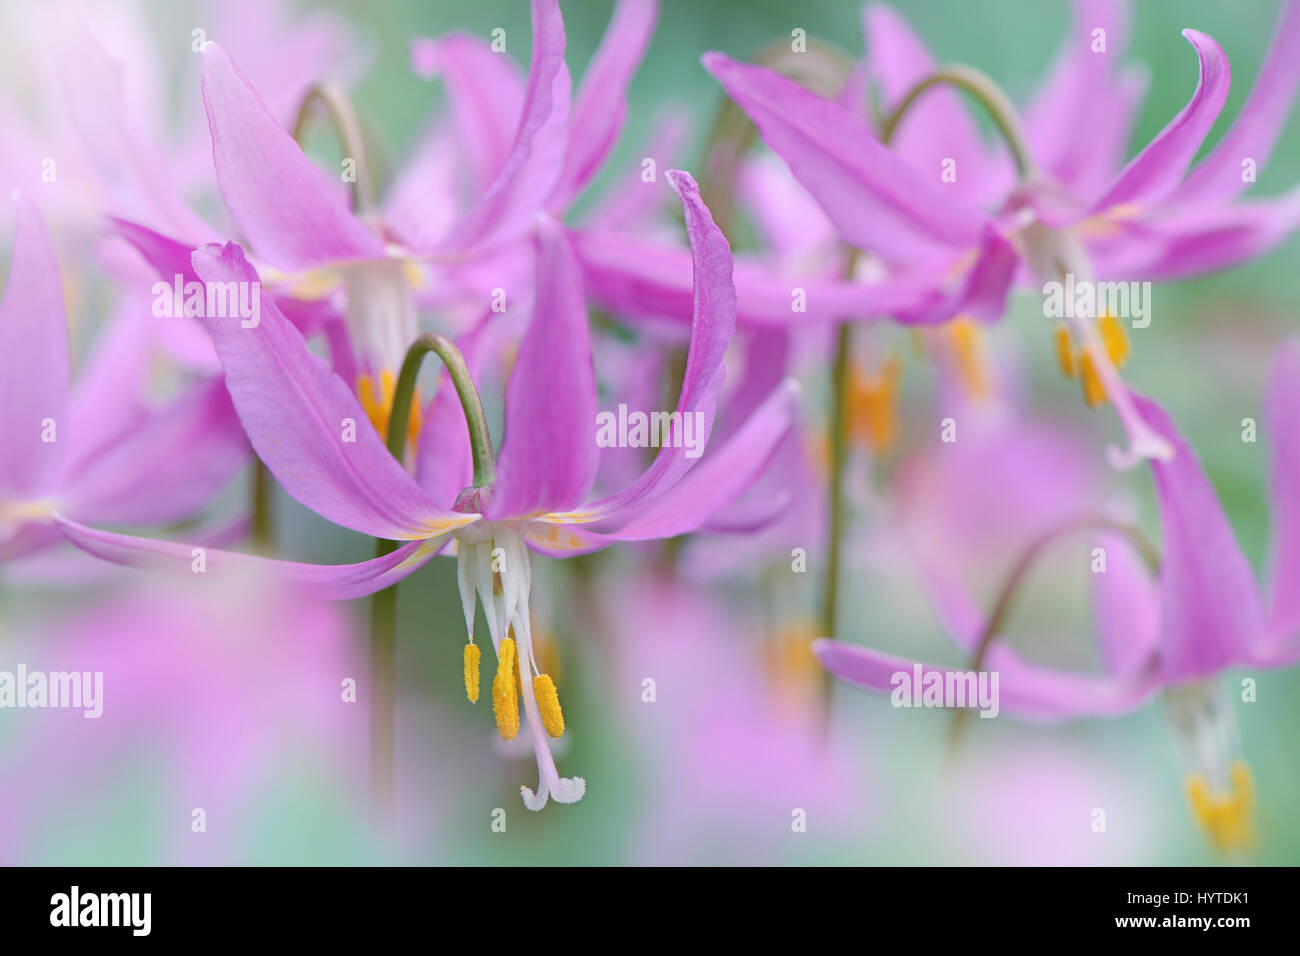 Close-up, macro image of the purple, spring flowering Erythronium dens-canis flowers also known as the Dog tooth Violet flower. Stock Photo